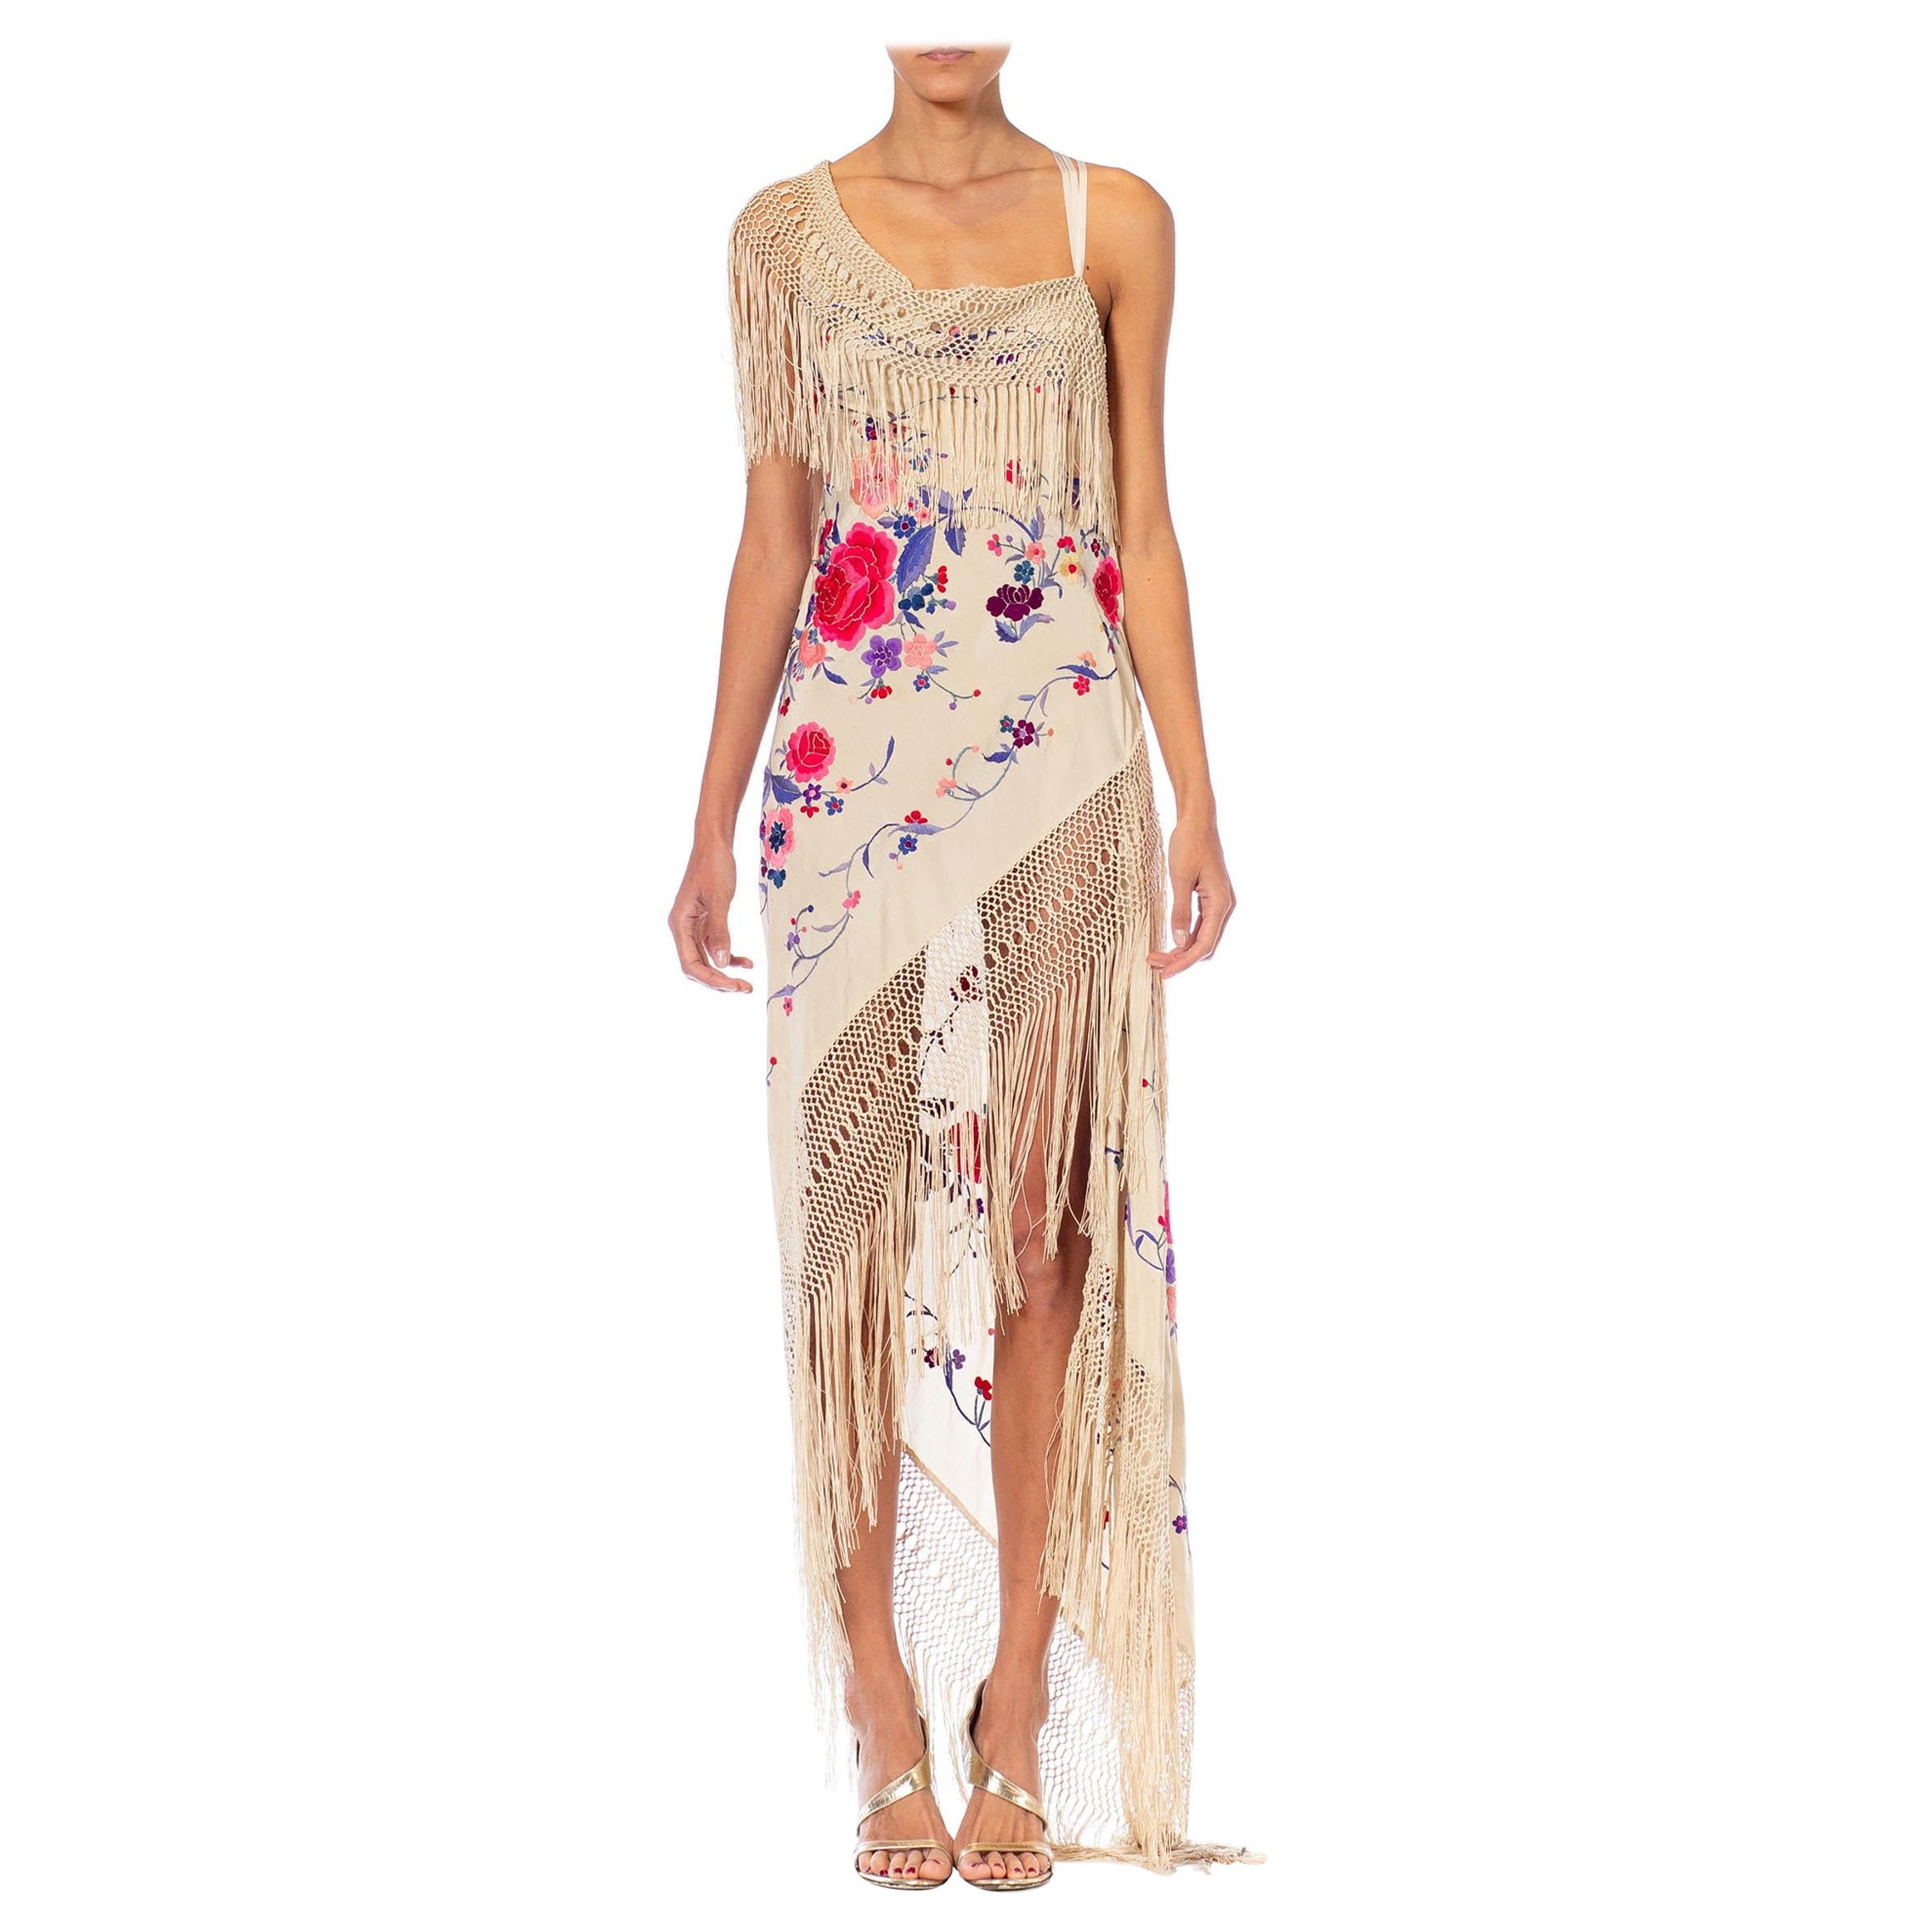 MORPHEW ATELIER Beige Bias Cut Fringed Dress Made From 1920S Hand-Embroidered S